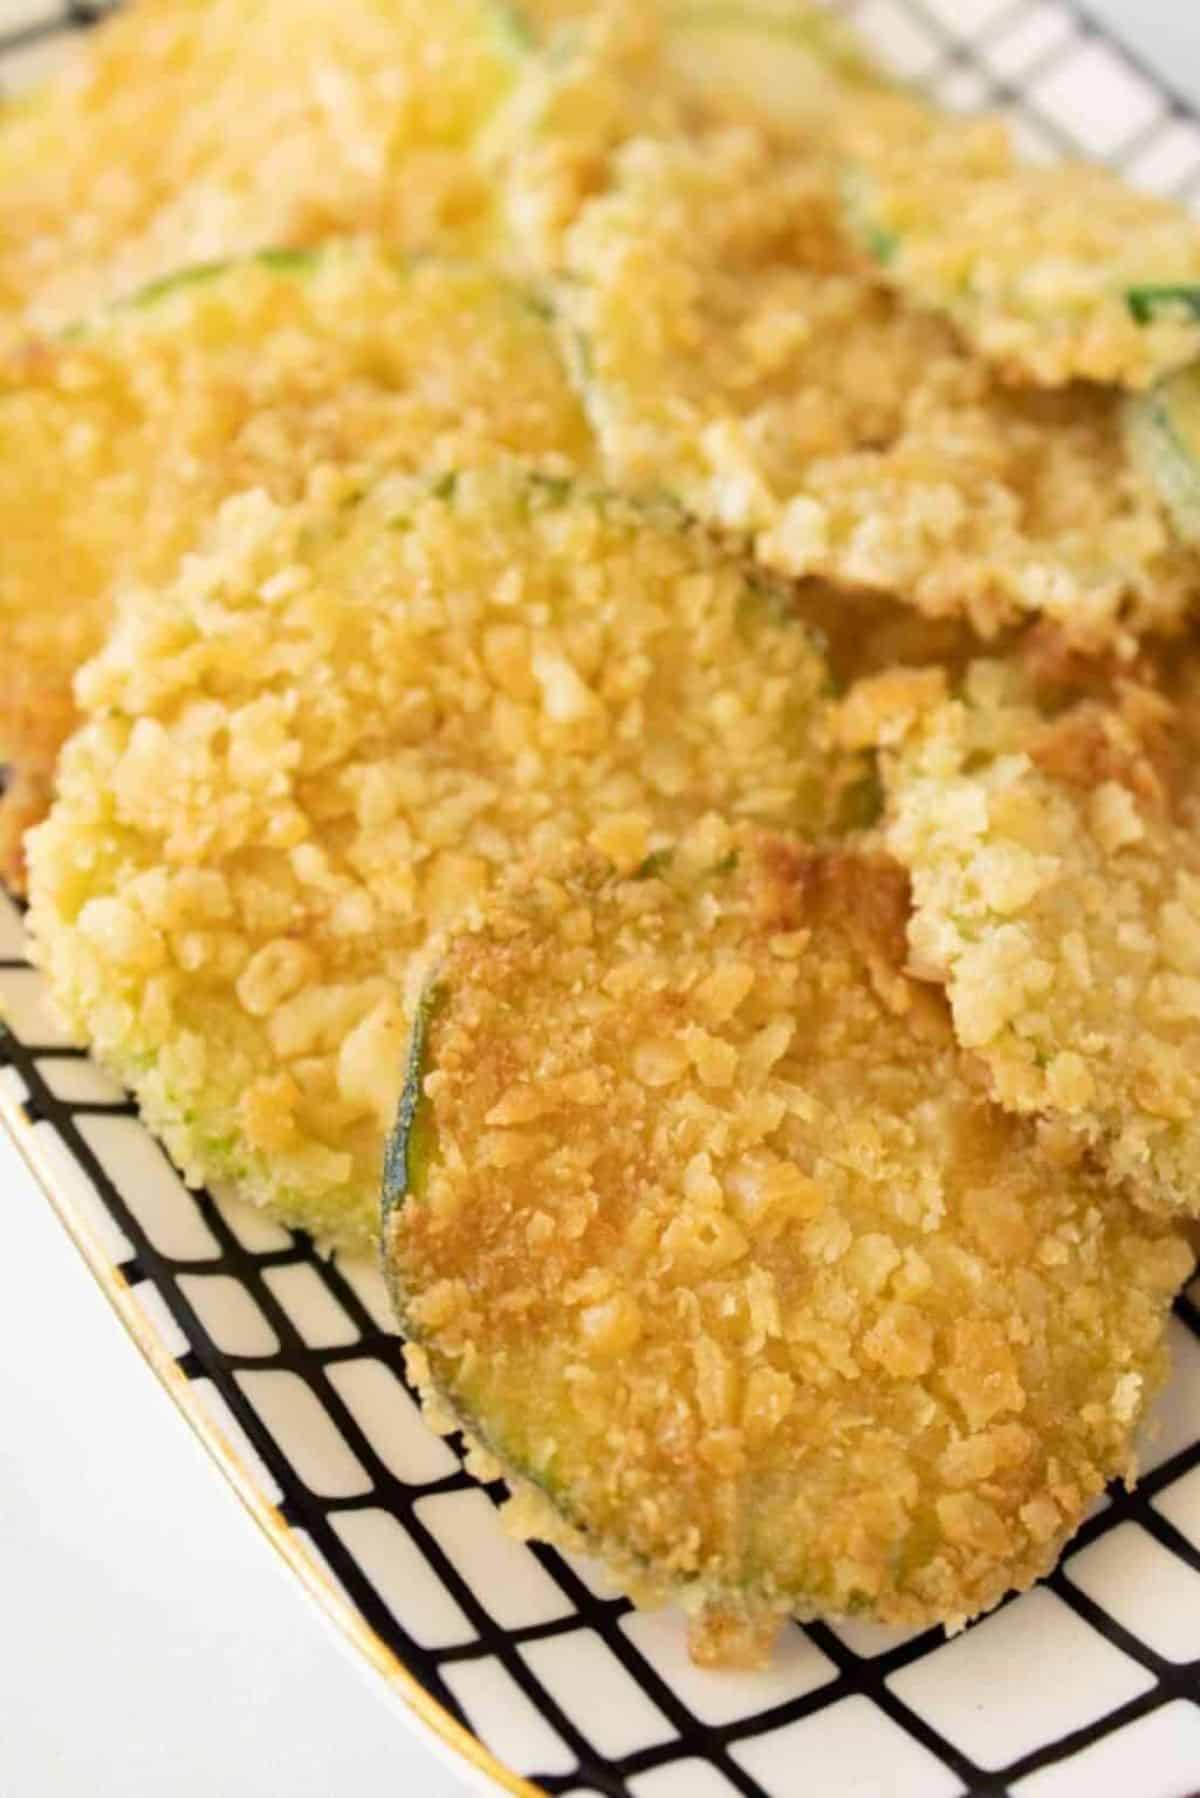 Fried Zucchini Chips on a tray.